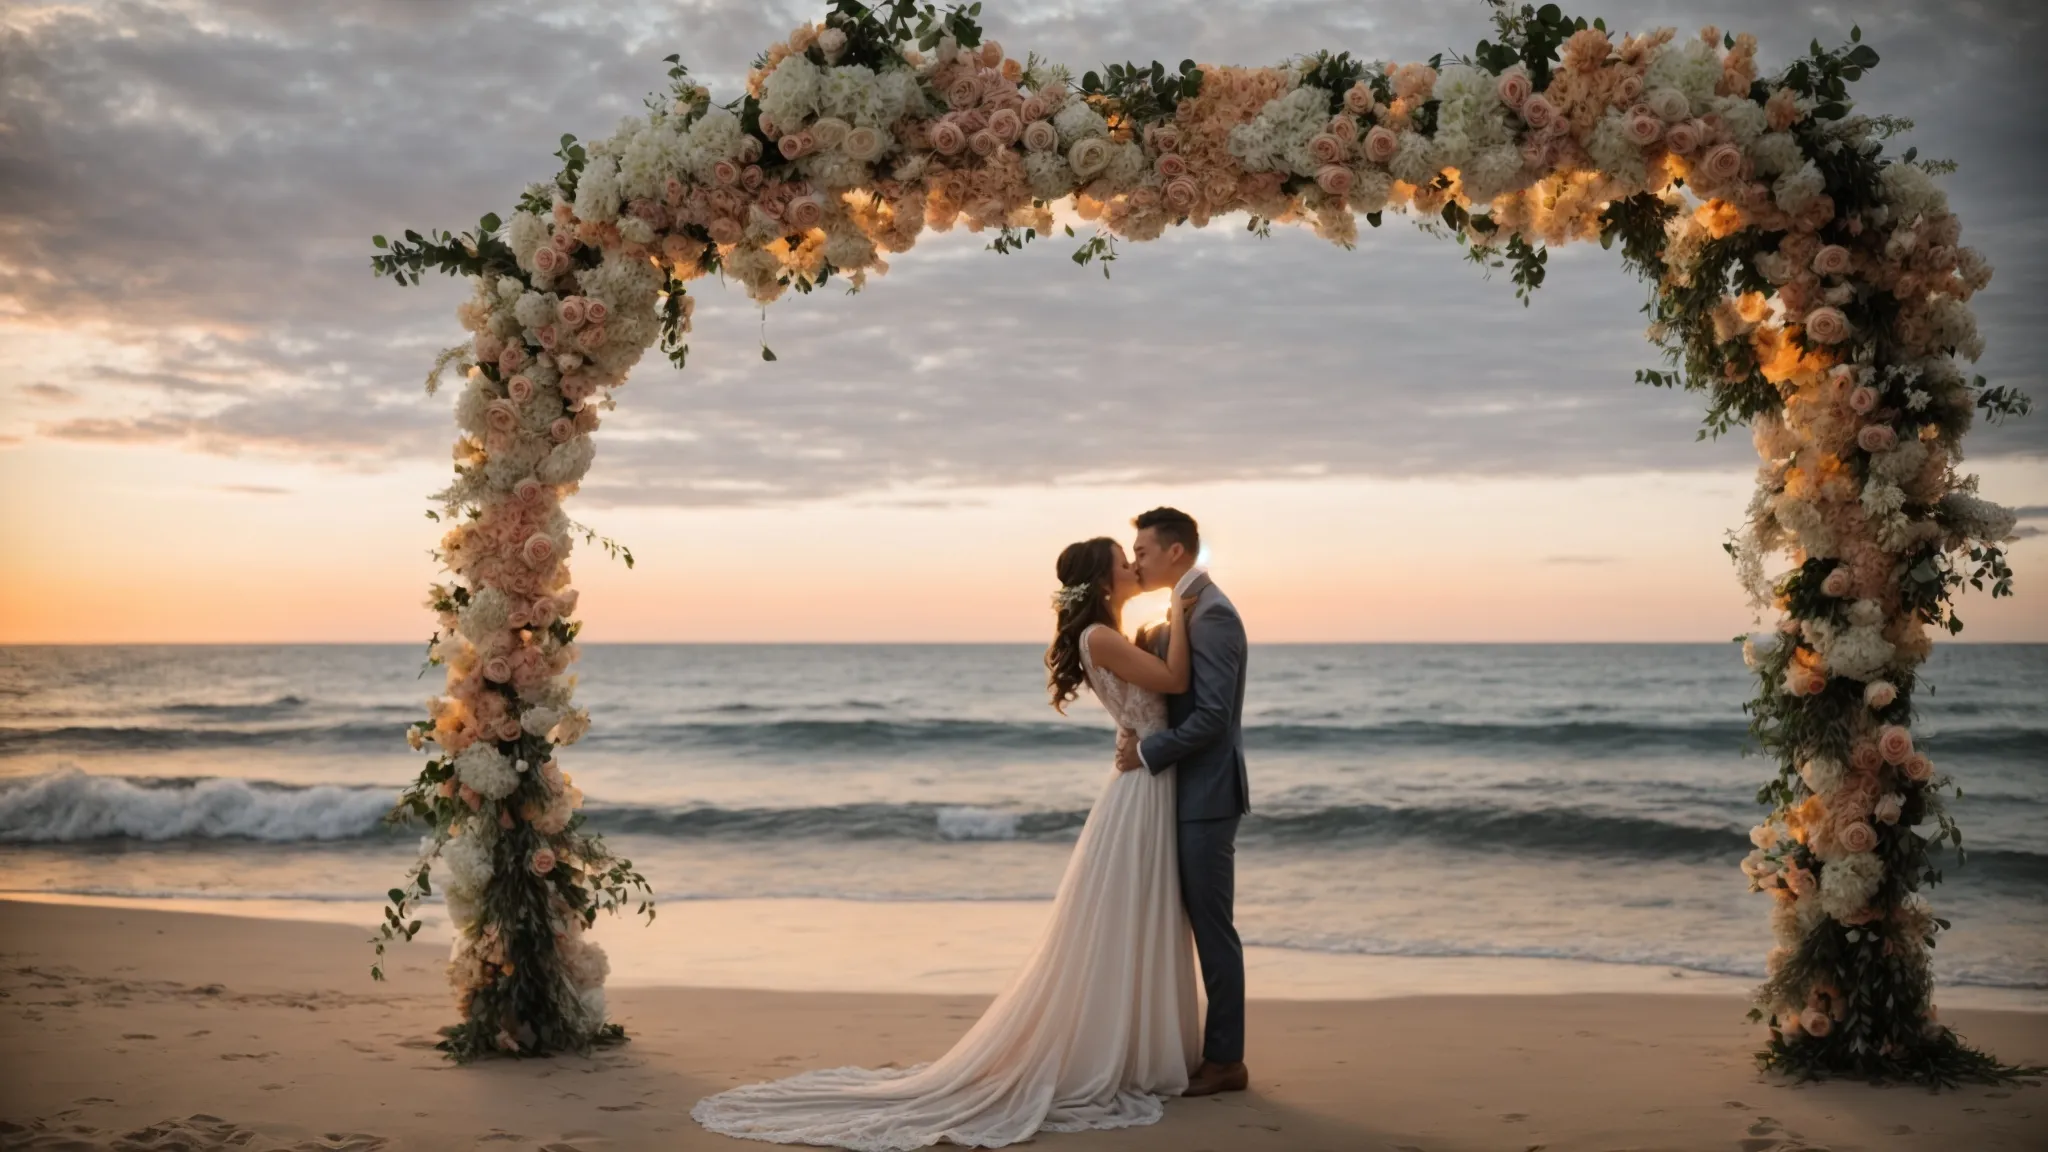 a newlywed couple shares a sunset kiss on a serene beach, with a floral arch framing them and the ocean in the background.